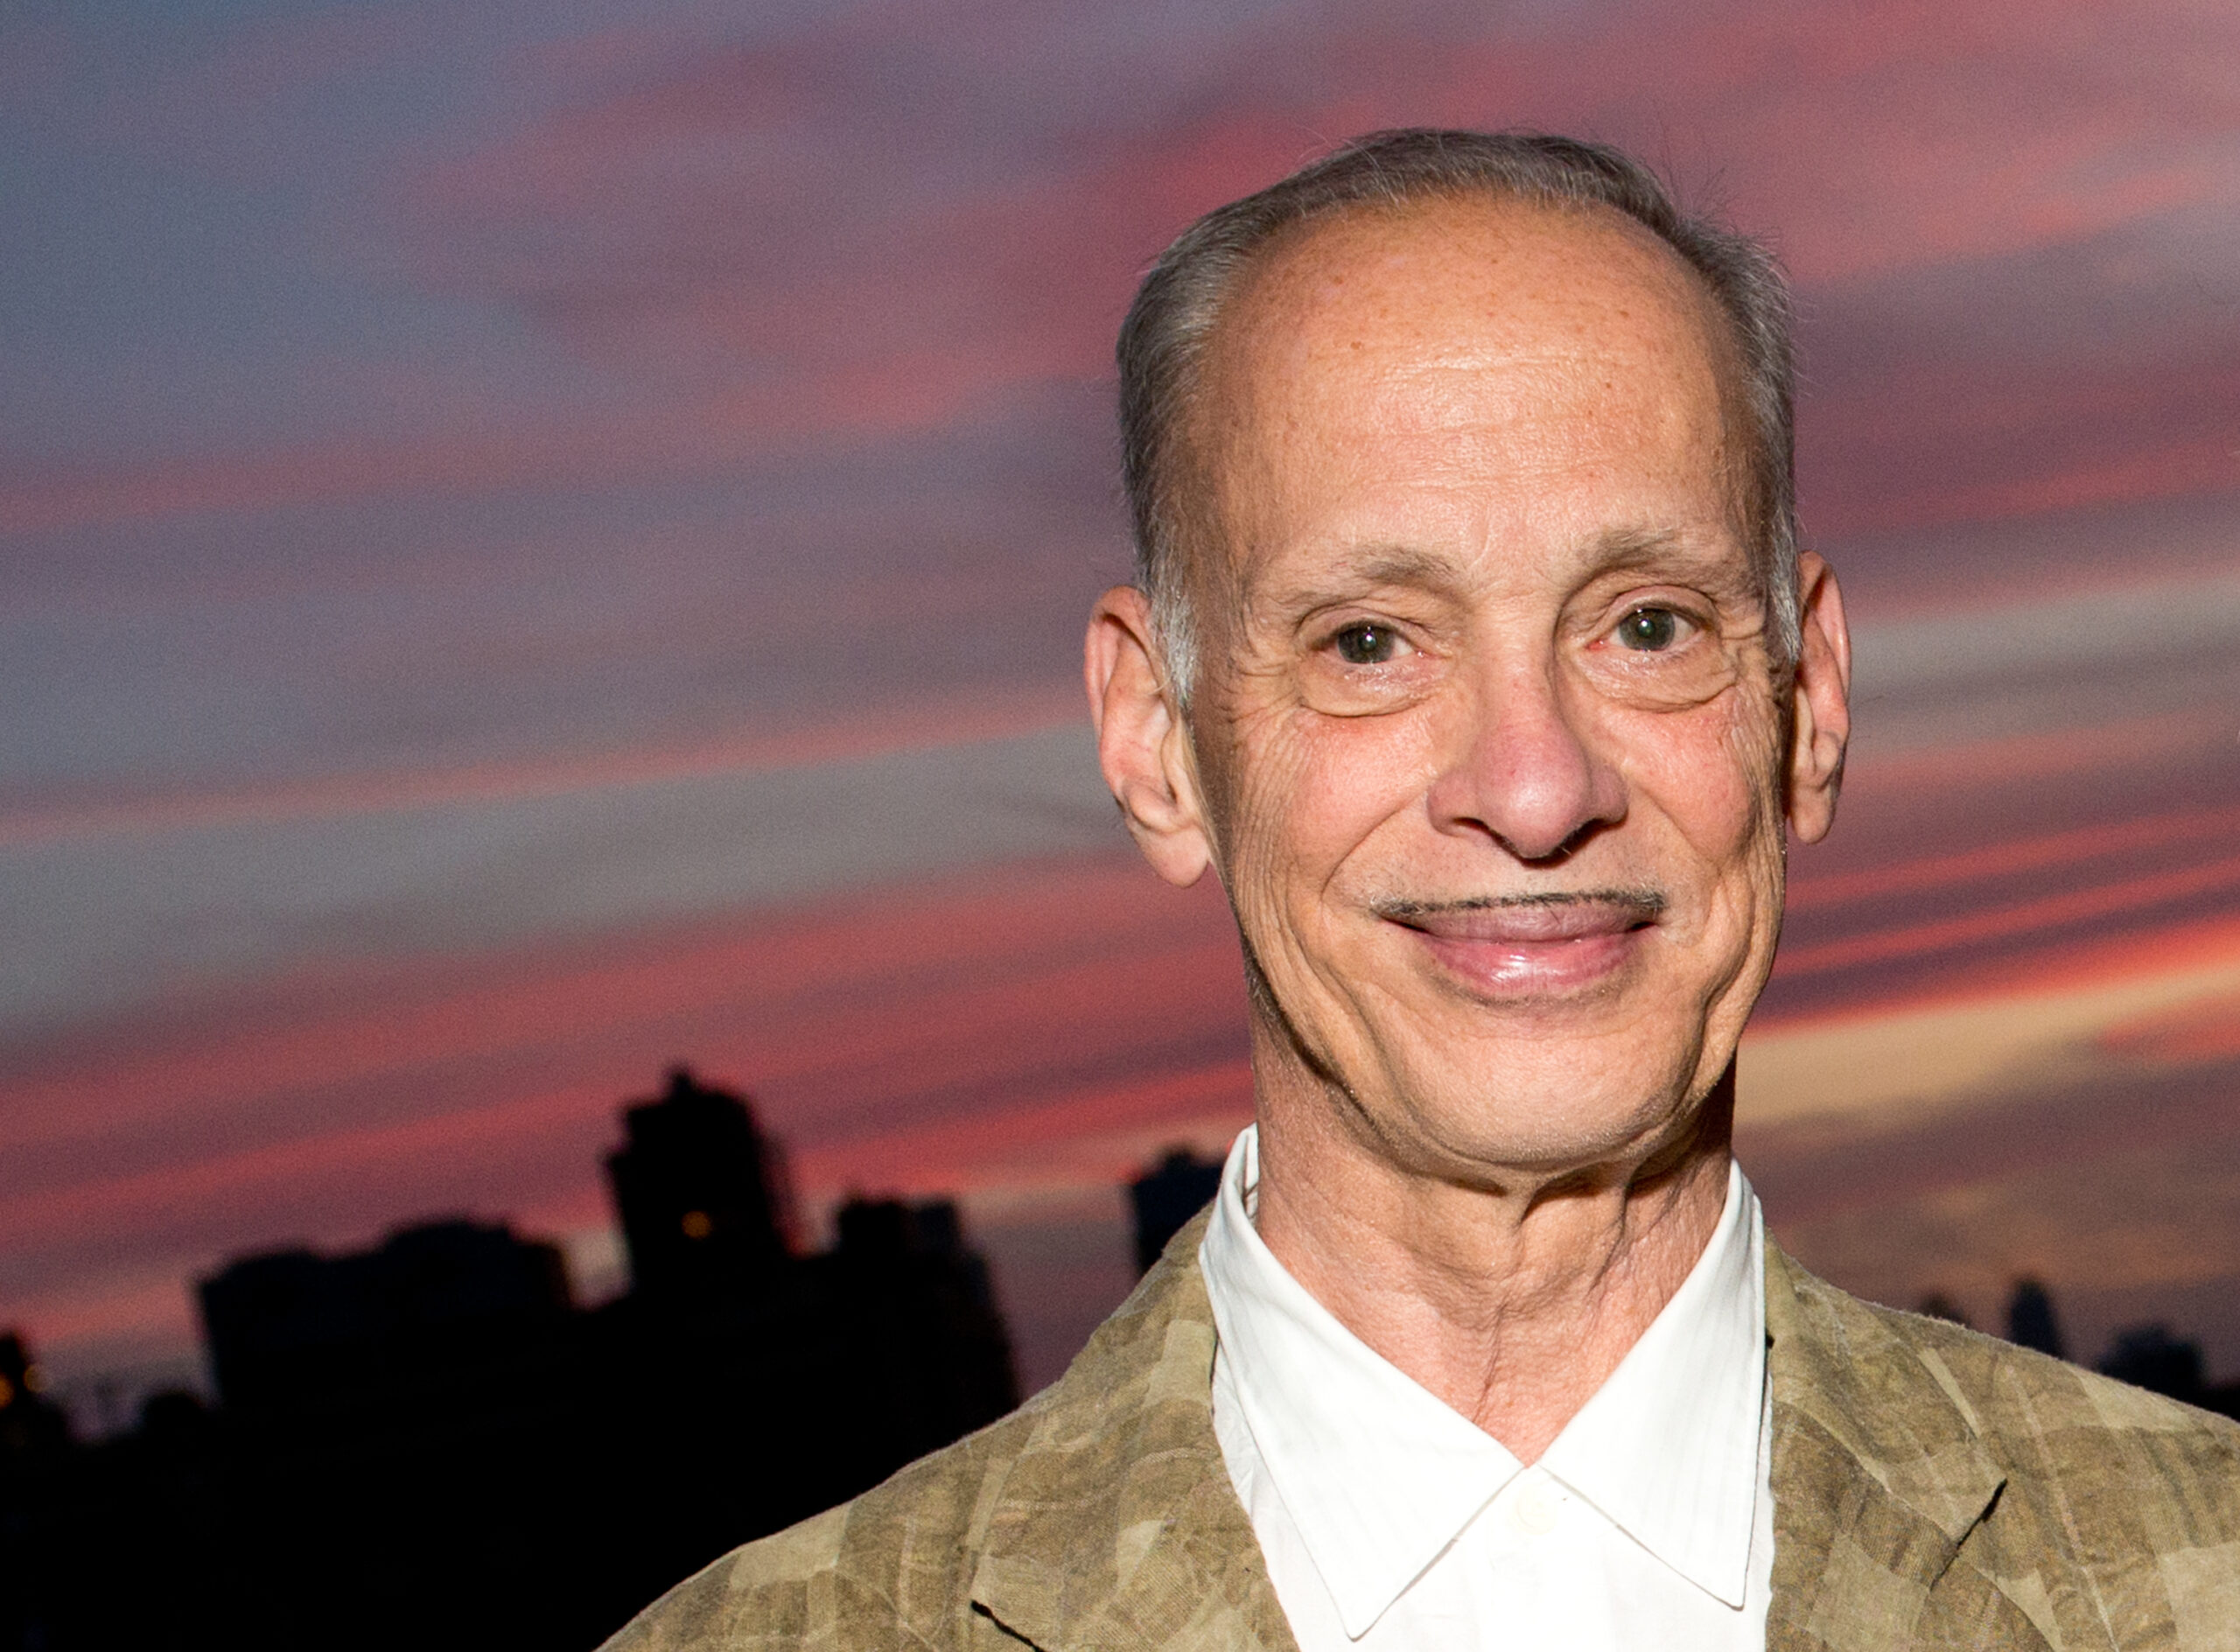 Here We Go Magic Found John Waters on the Side of the Road